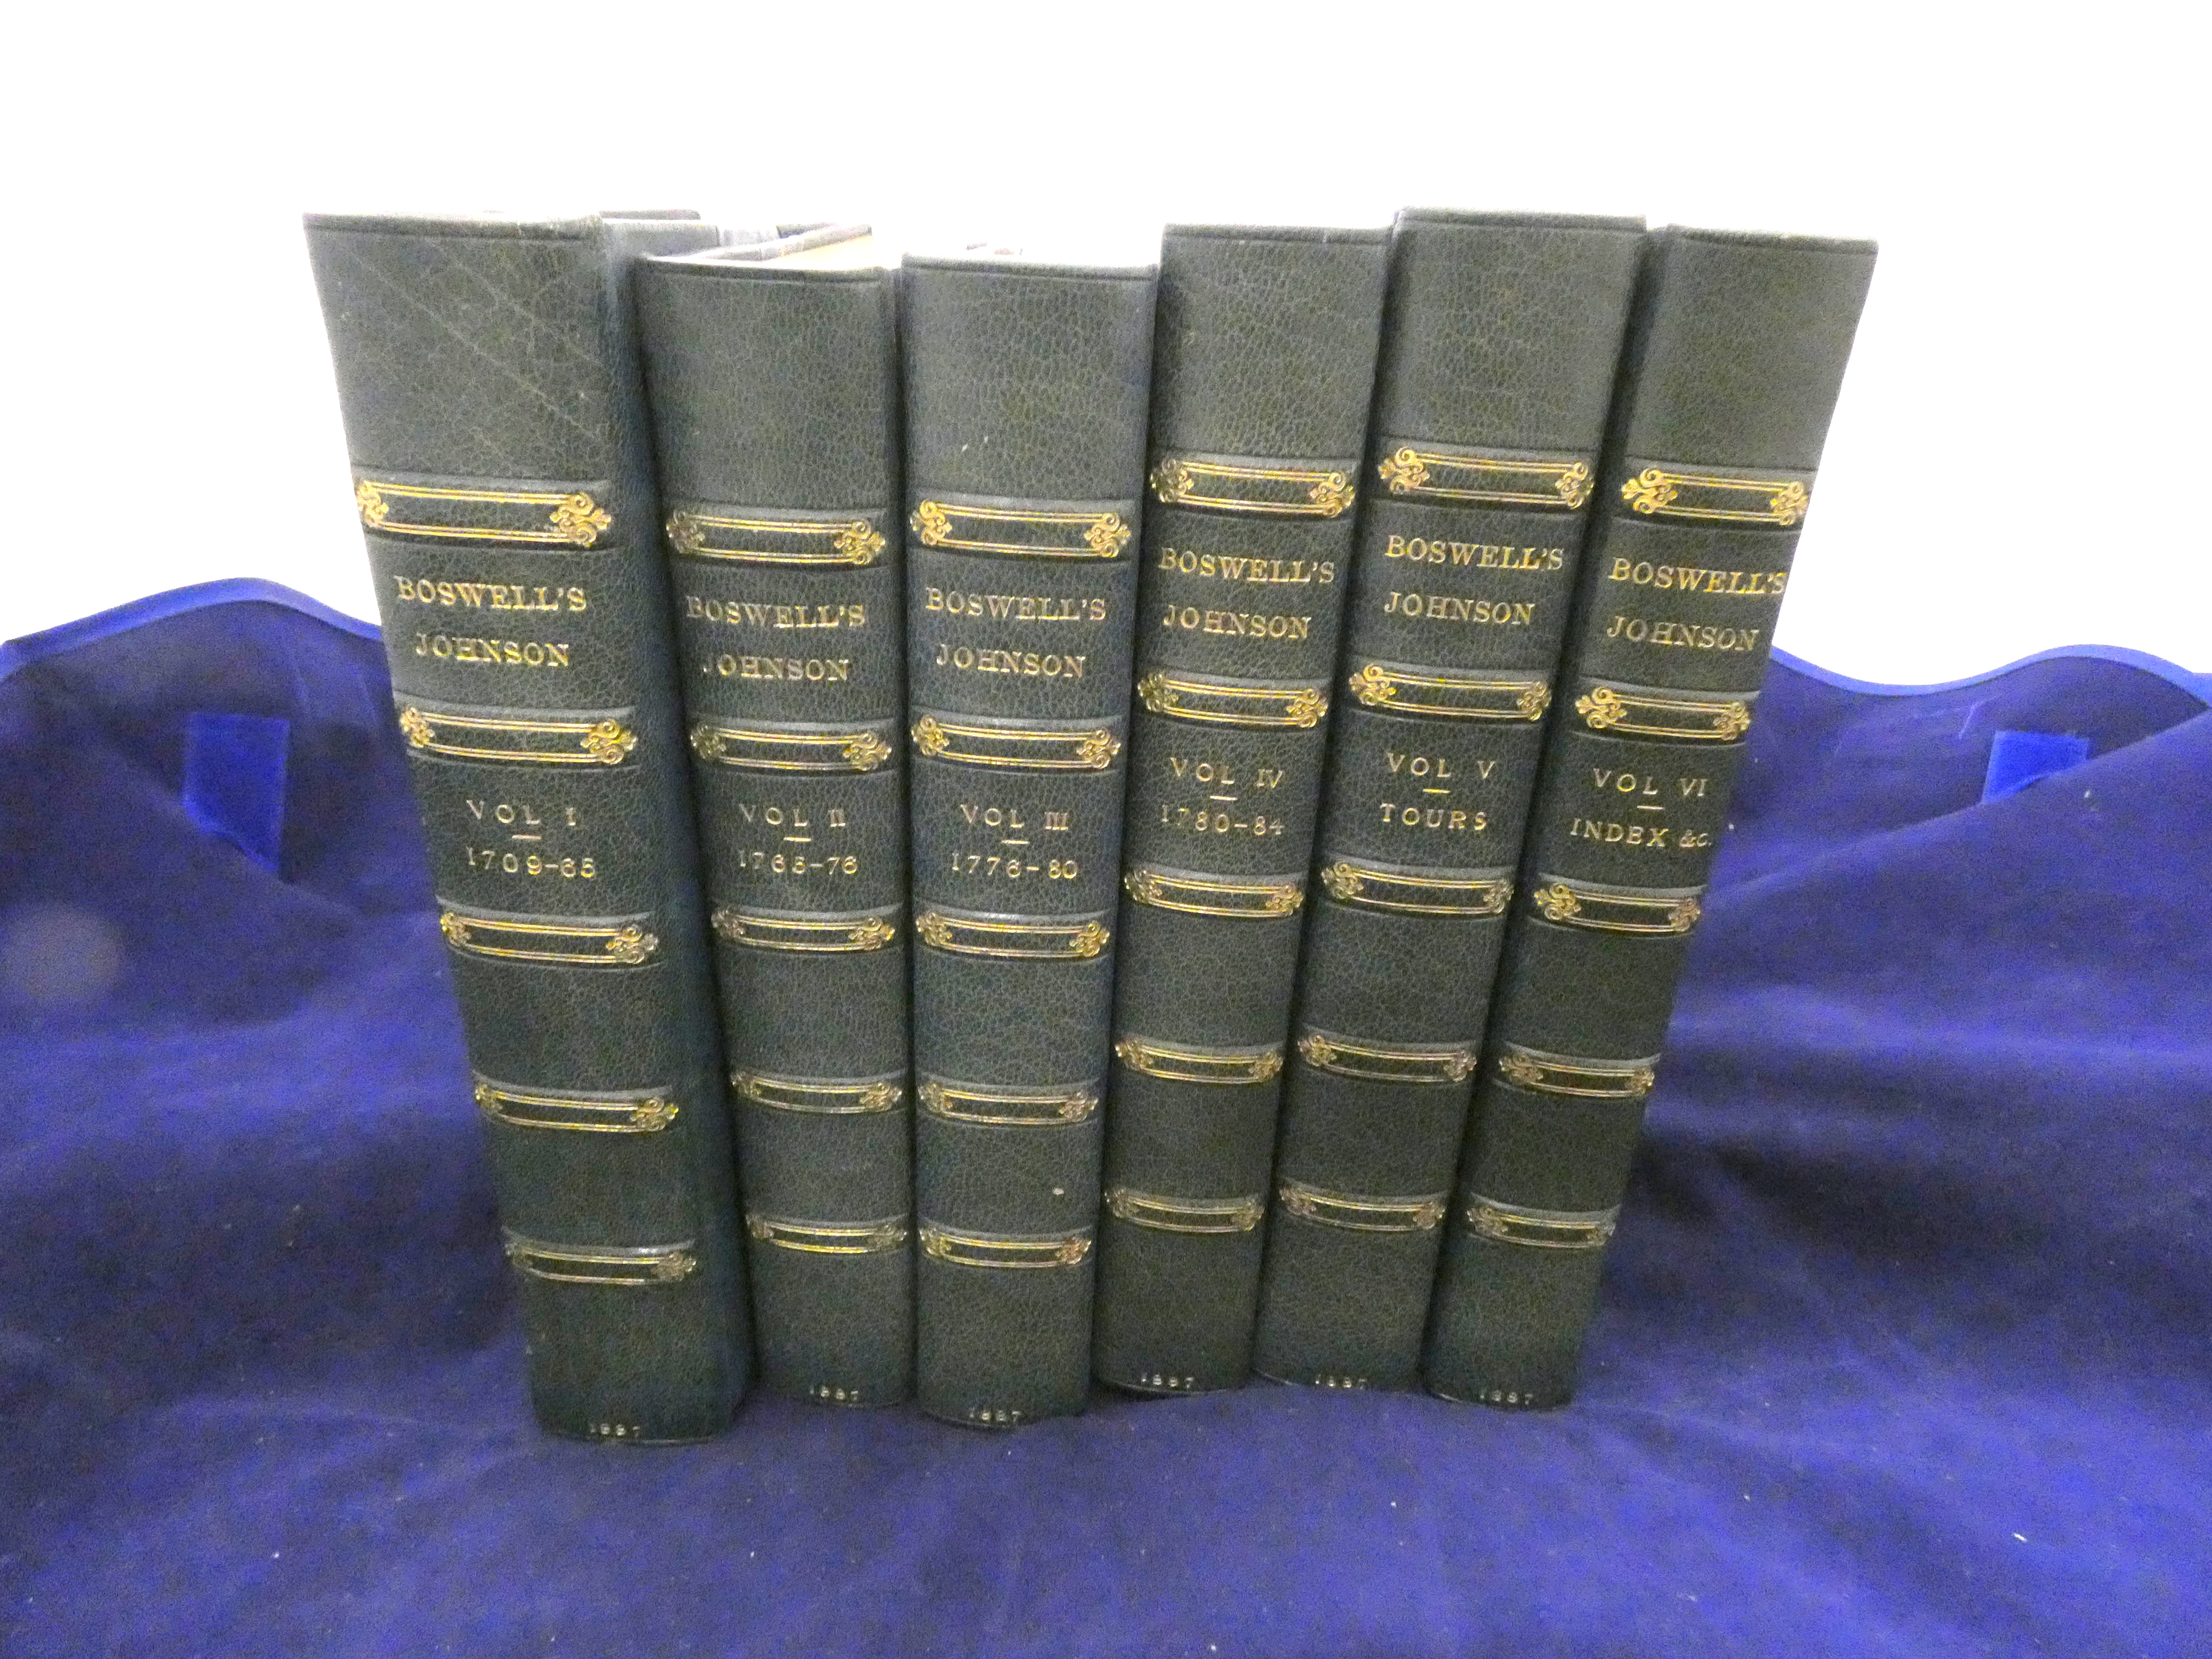 BOSWELL JAMES.  Life of Johnson, ed. by George Birkbeck Hill. 6 vols. Half titles. Eng. port.